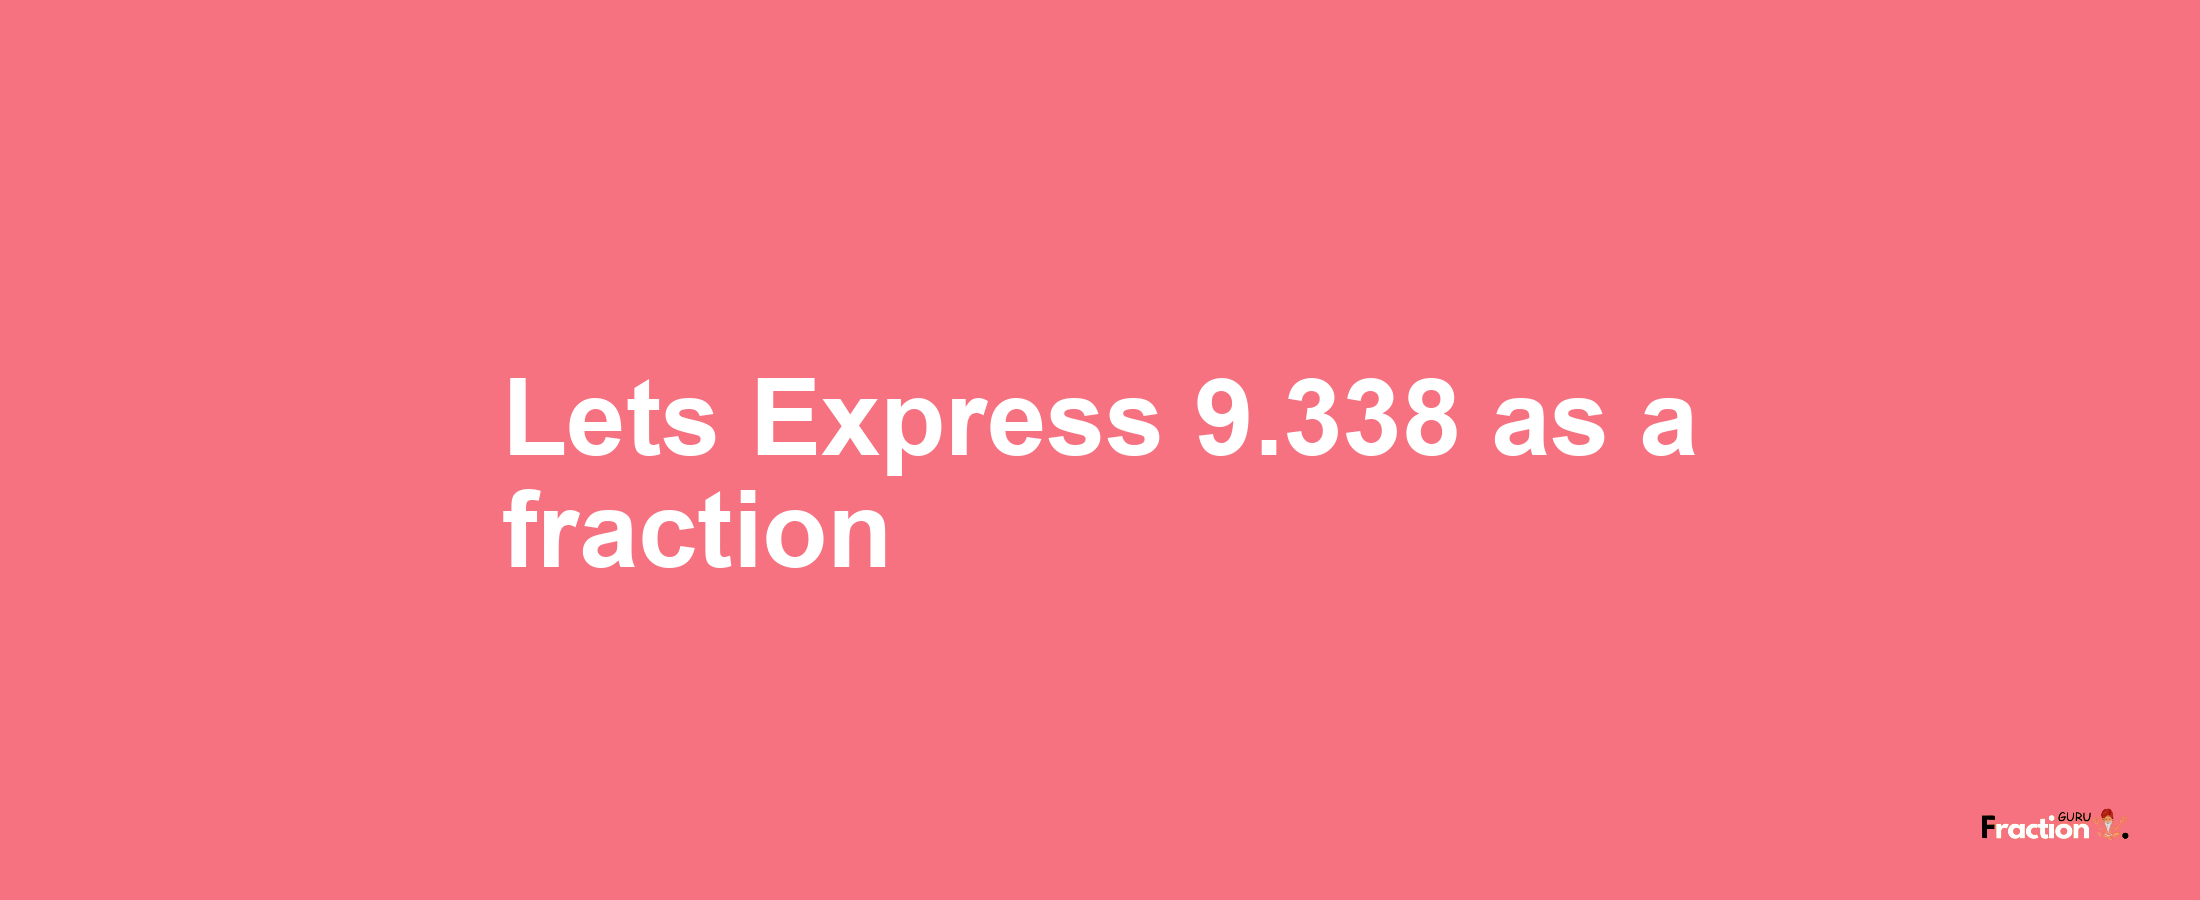 Lets Express 9.338 as afraction